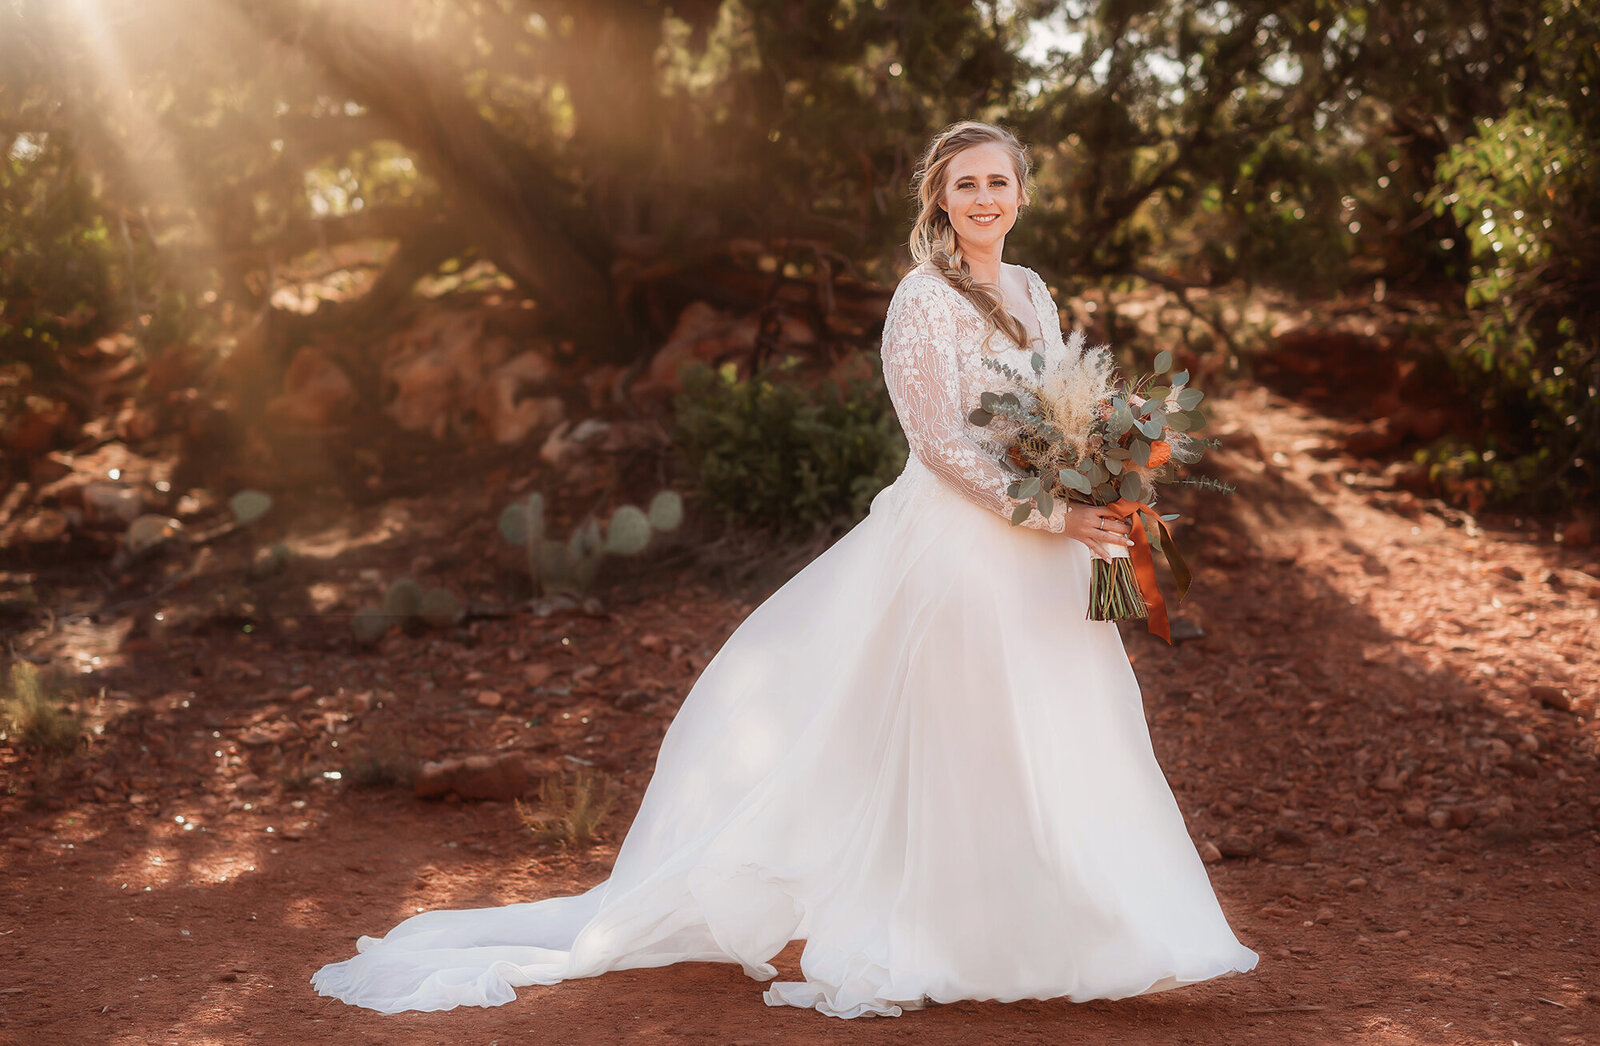 Bride poses for portraits before her Elopement in Sedona, AZ.